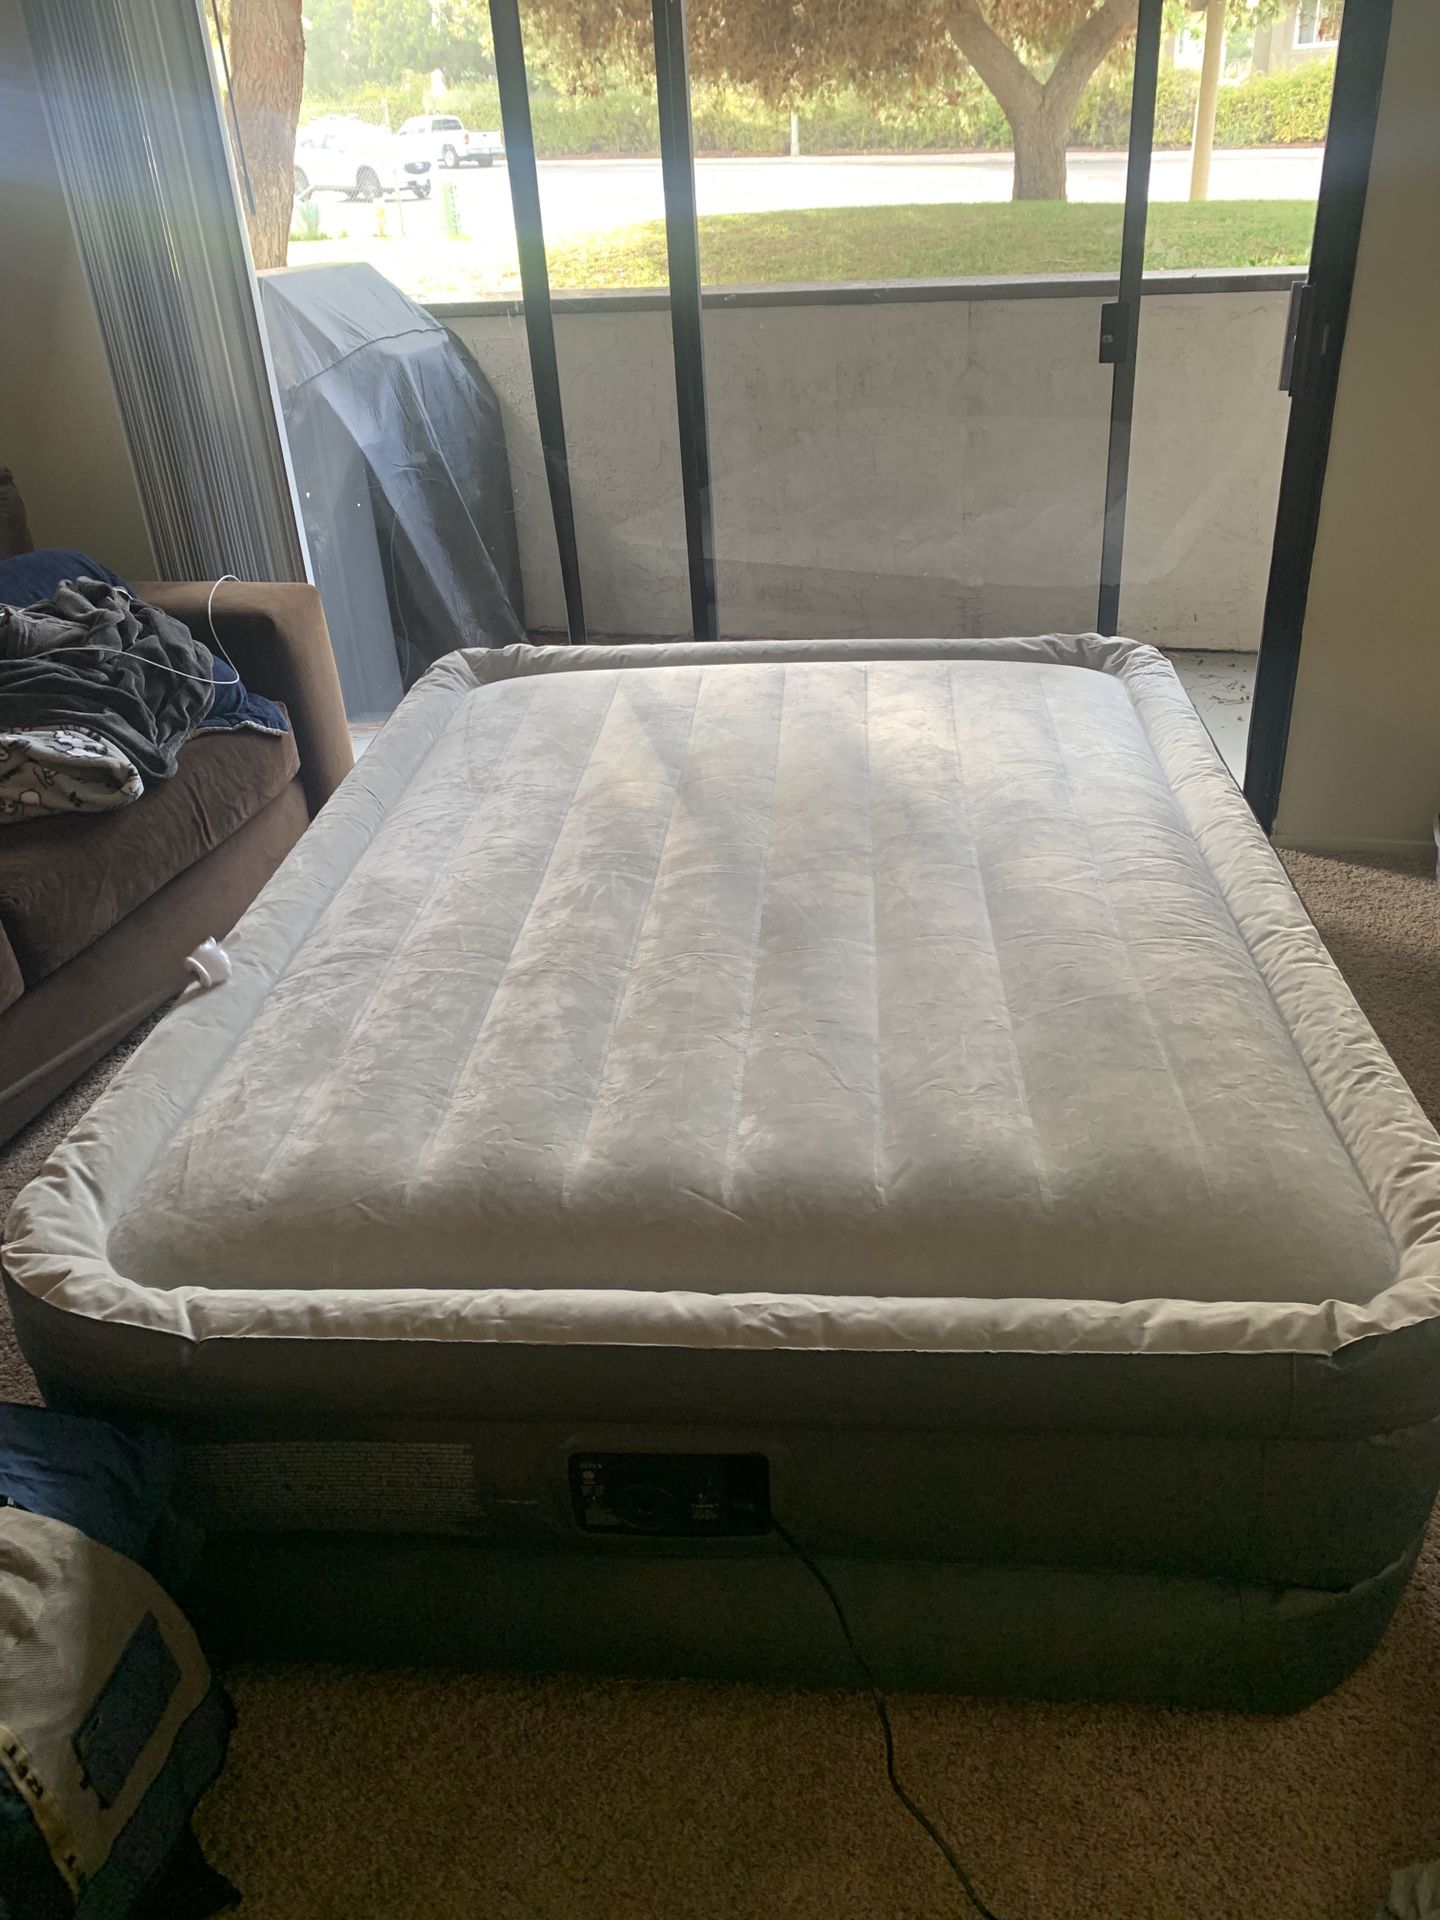 Quality Air Mattress - Like new condition